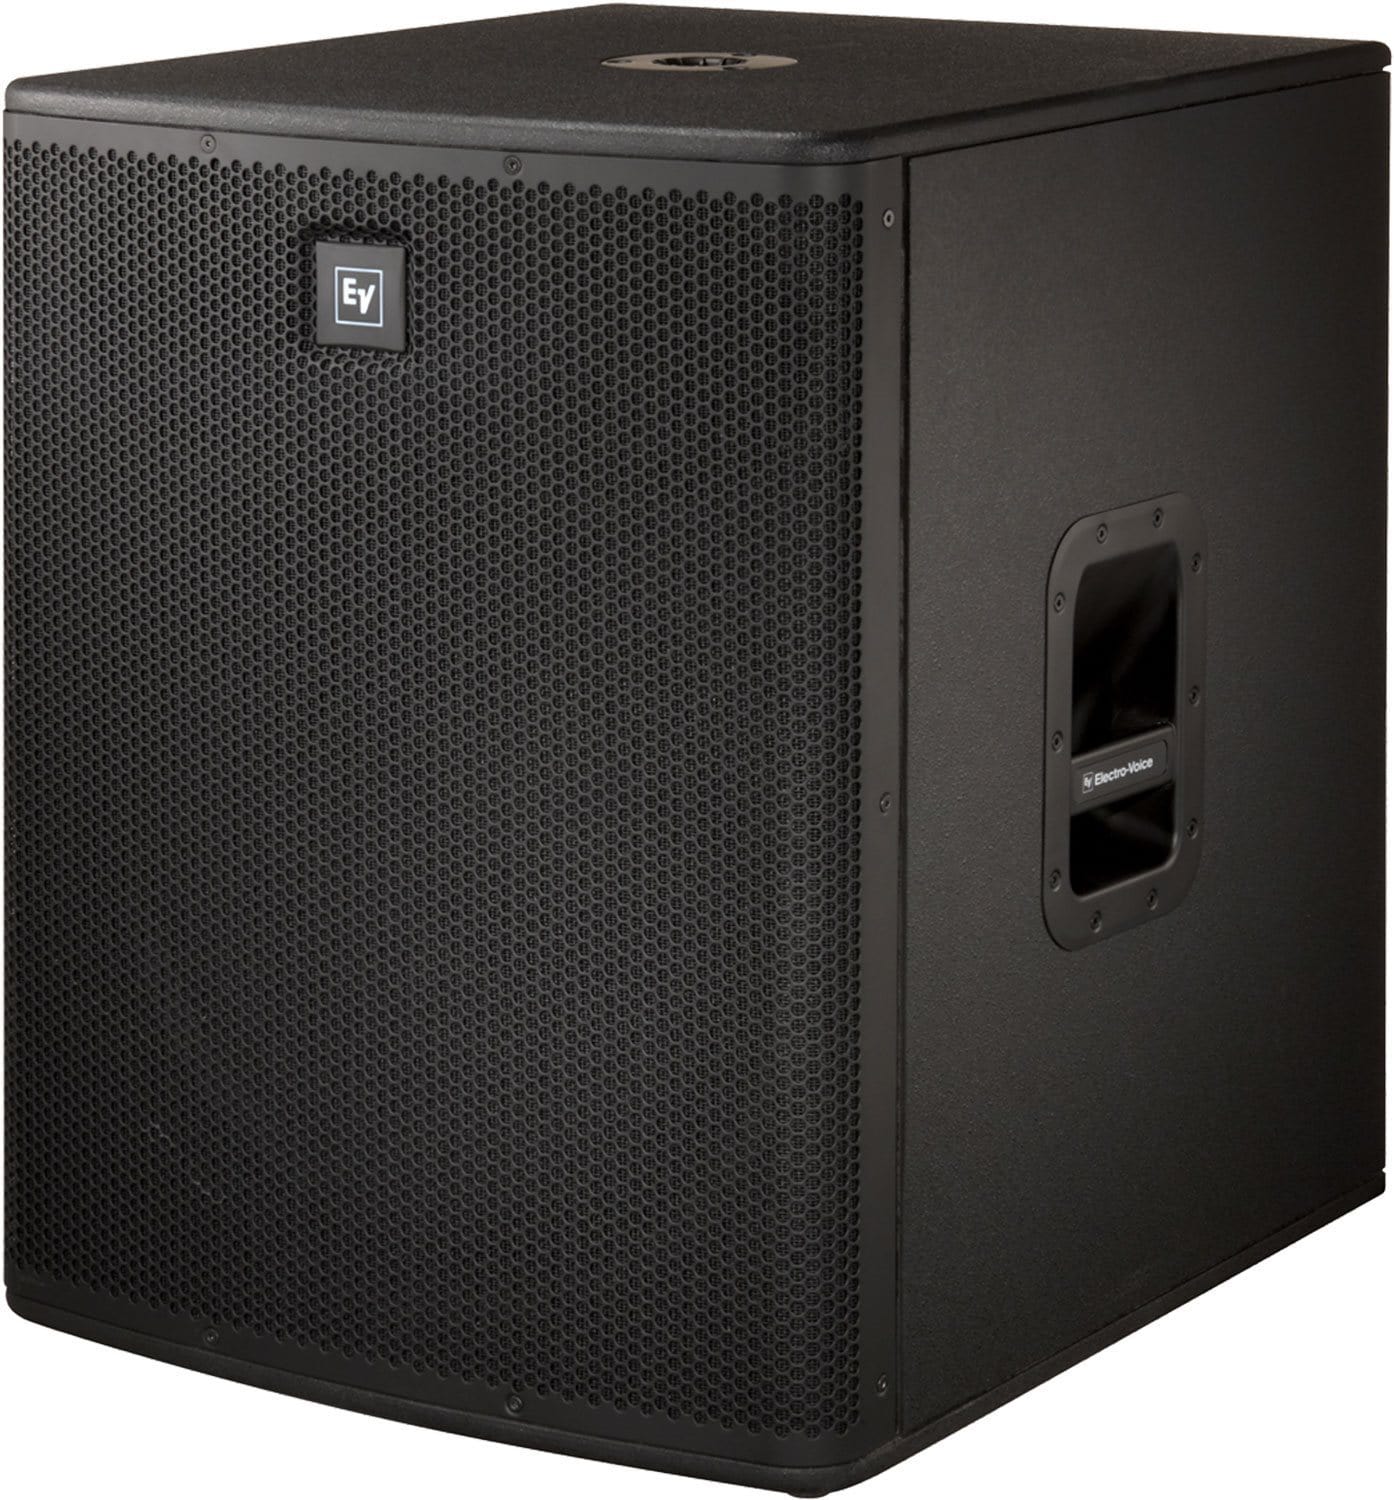 Electro-Voice ELX118P 18-Inch Powered Subwoofer - ProSound and Stage Lighting